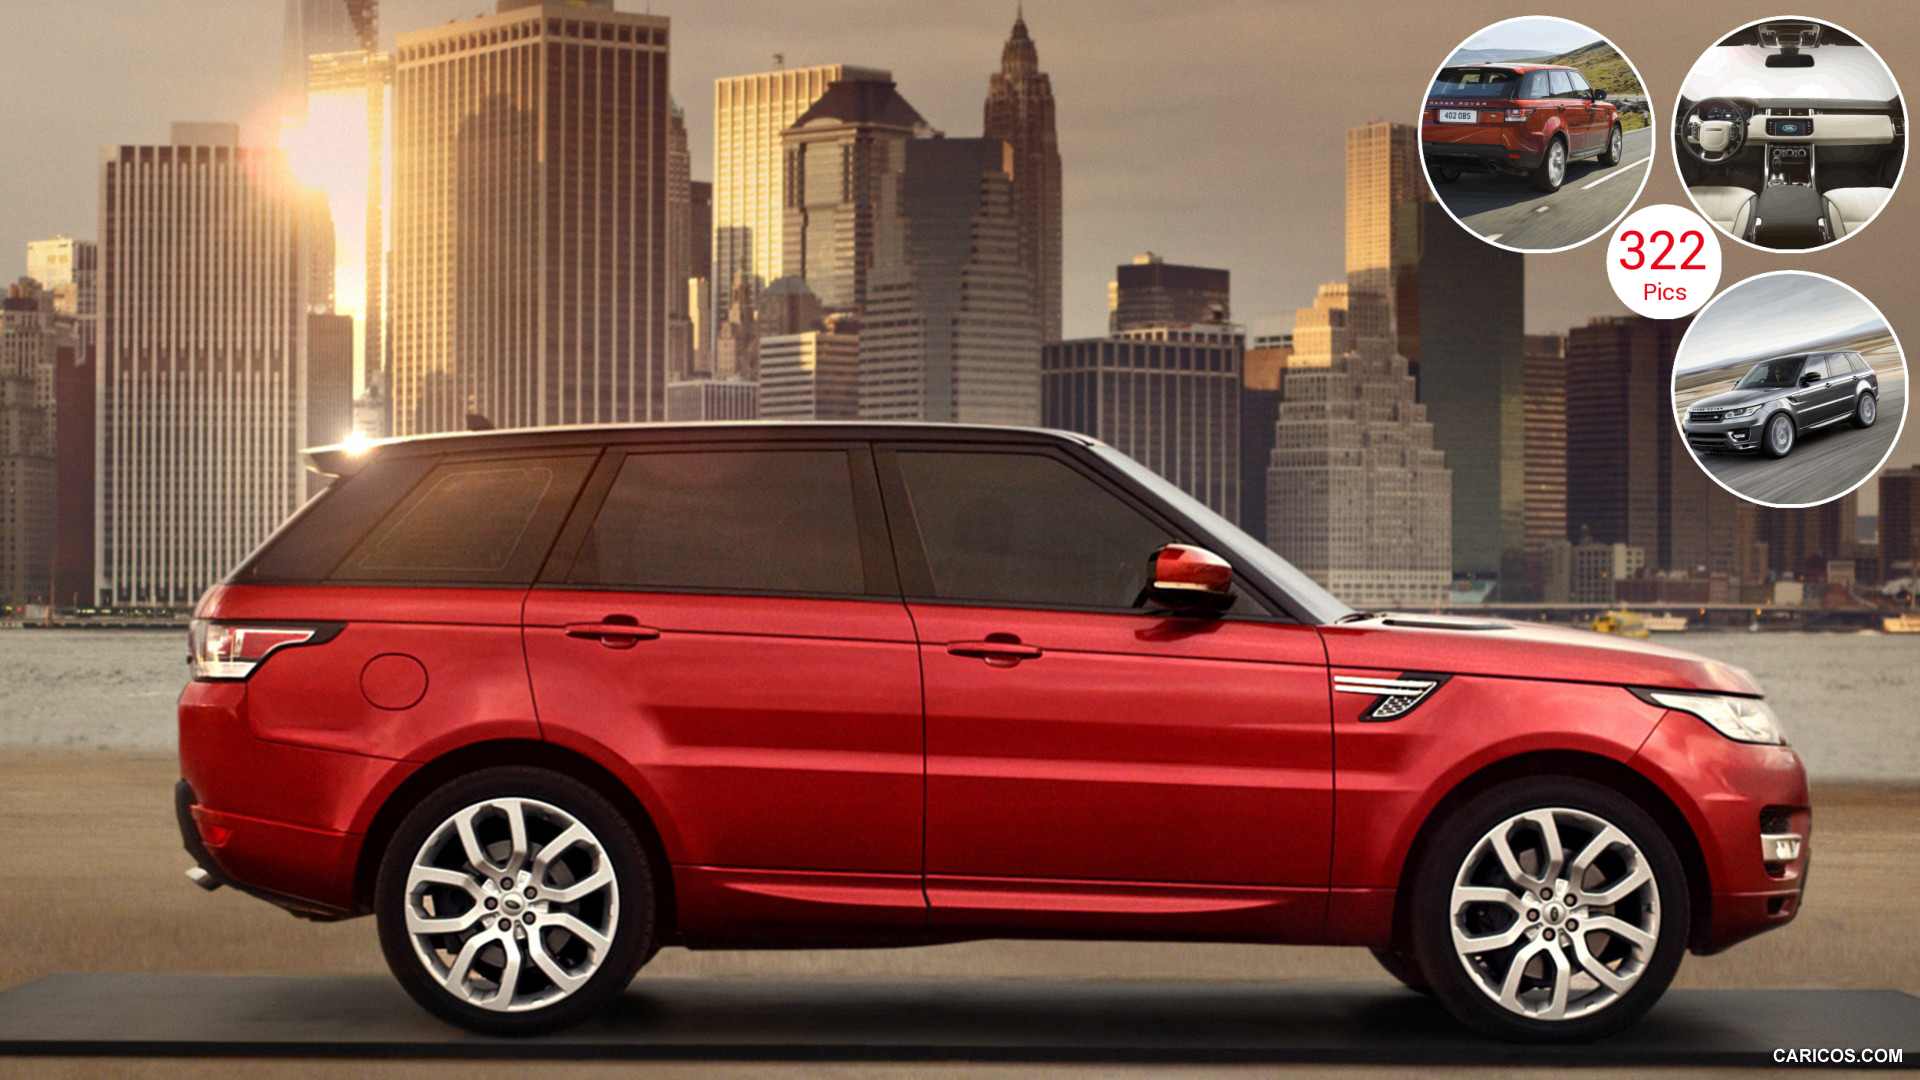 2014 Range Rover Sport The Delivery | HD Wallpaper #139 | 1920x1080